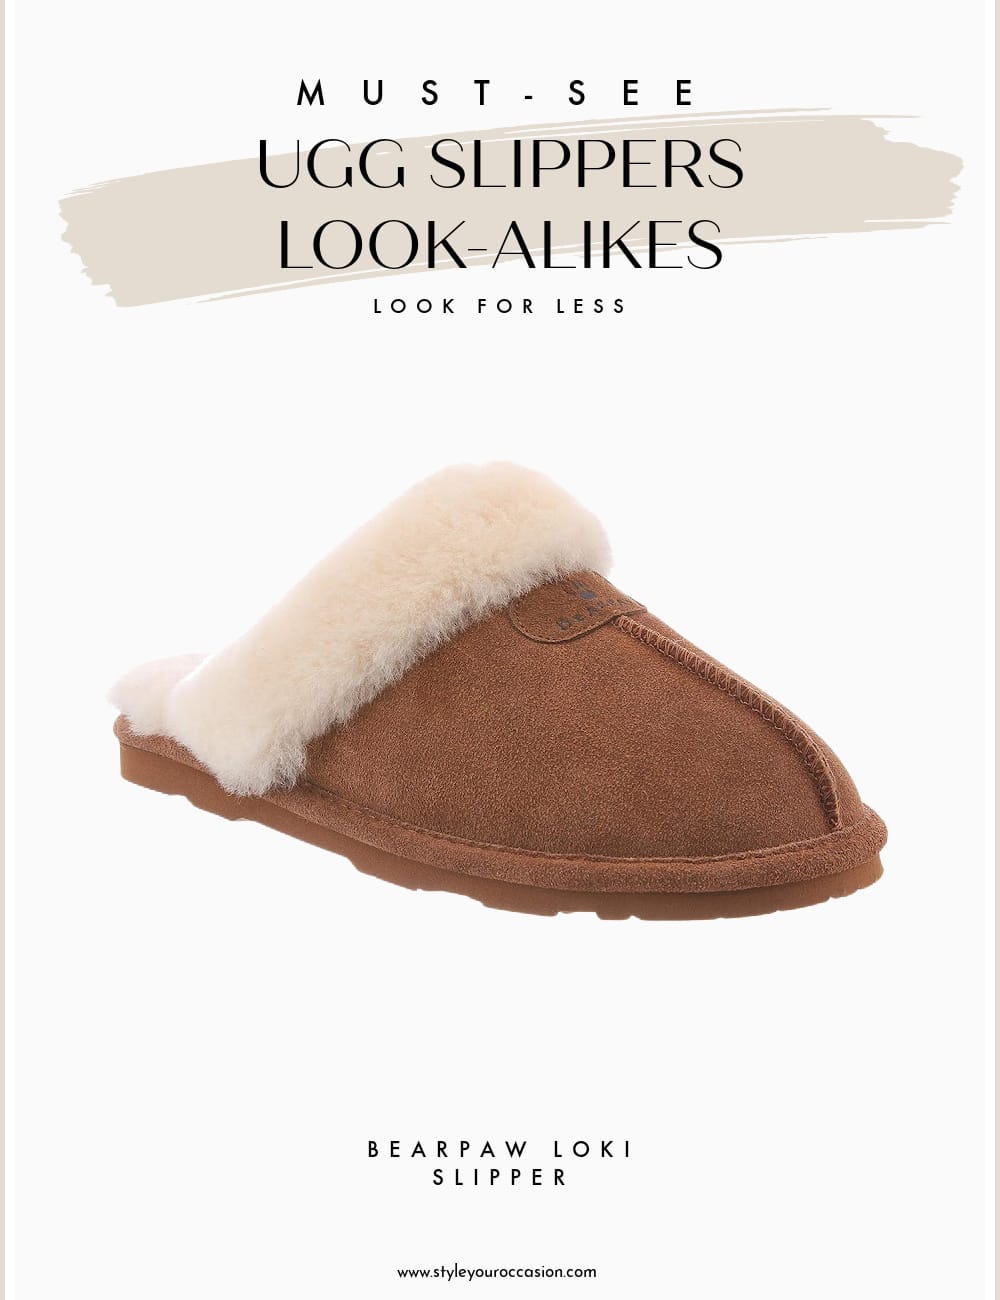 An image board of the Loki slippers from Bearpaw as a dupe for Ugg slippers